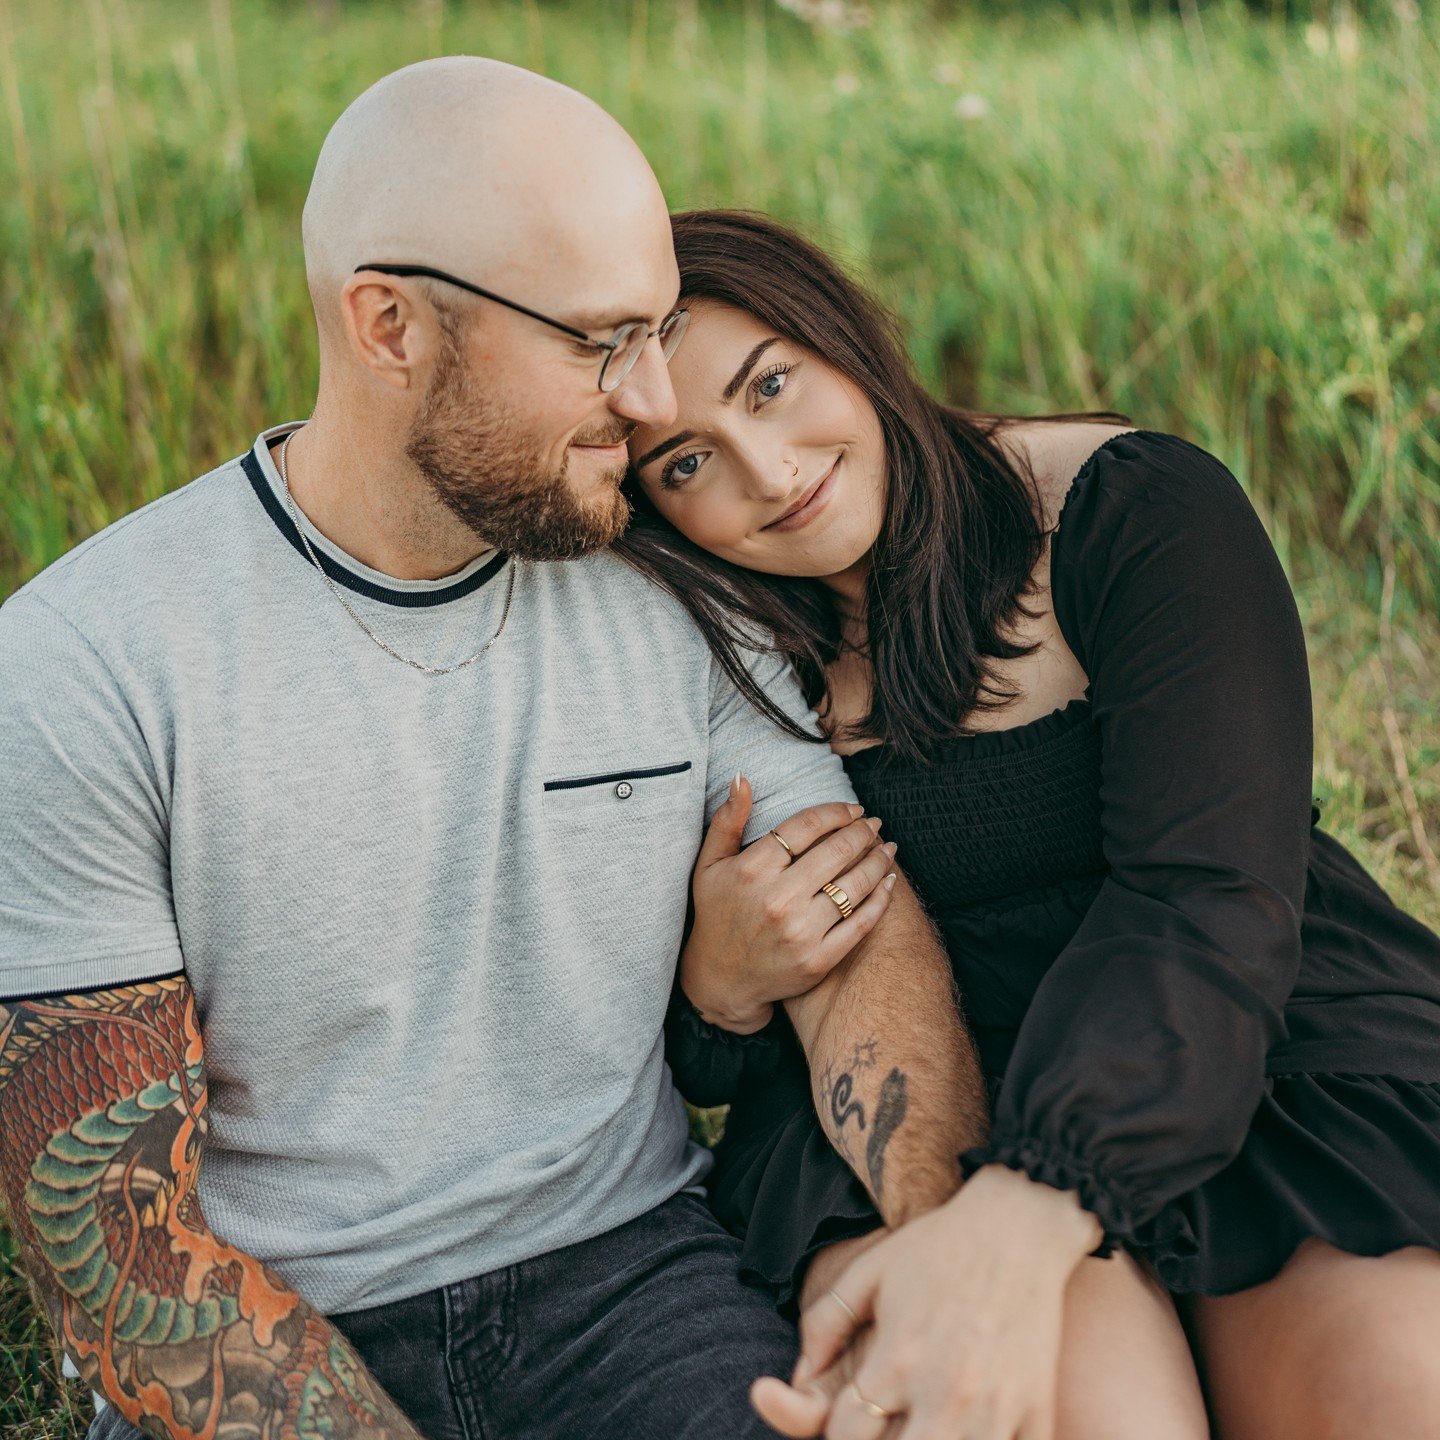 Wedding season is just around the corner and we couldn't be more excited! But we are so grateful every day for all the wonderful couples we meet during couple and engagement sessions. Can't wait to capture Mikayla &amp; Daniel's wedding in summer of 